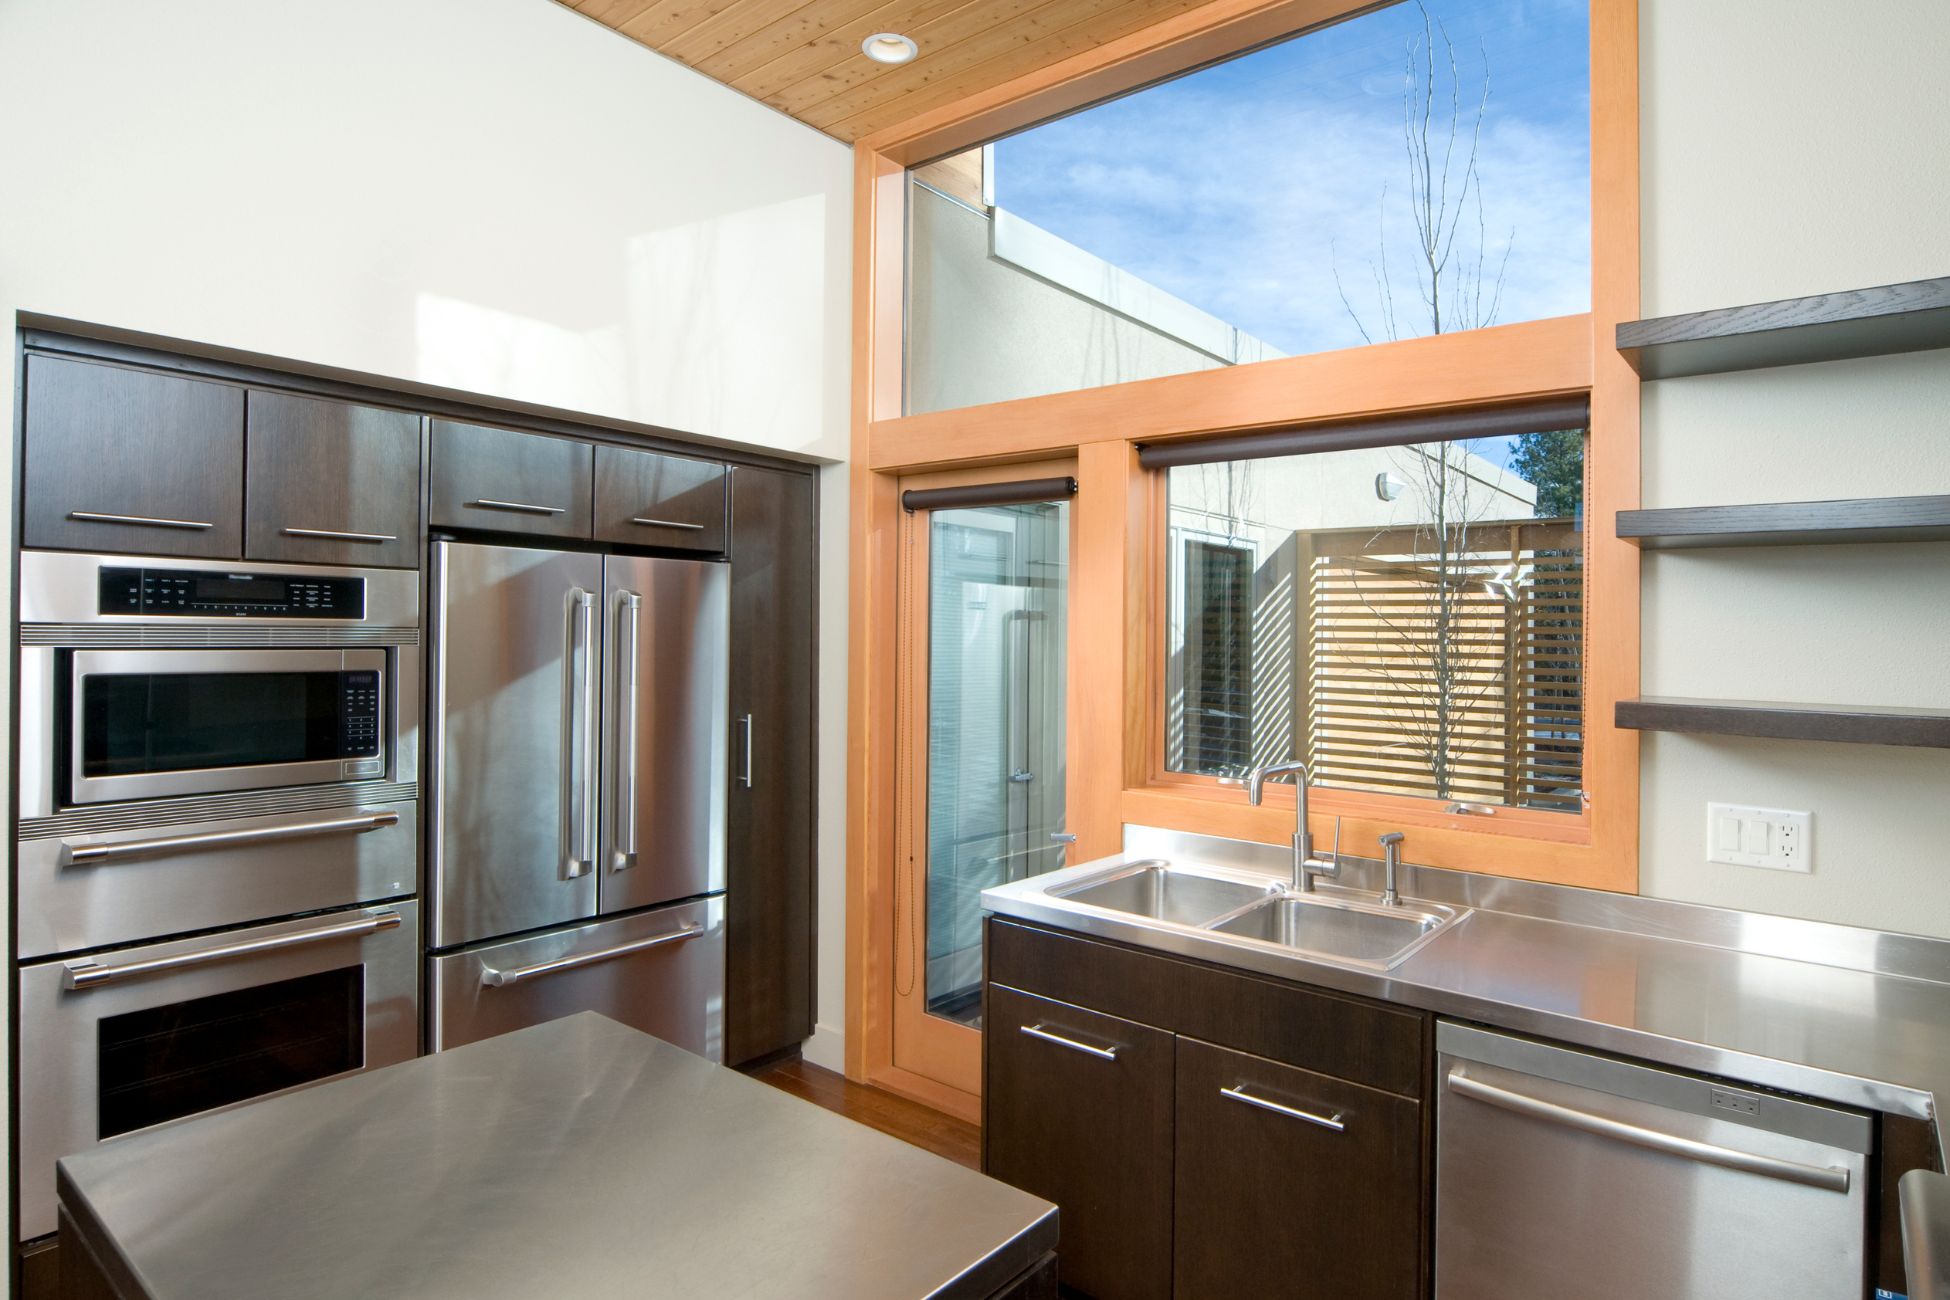 Modern kitchen style with stainless steel countertop